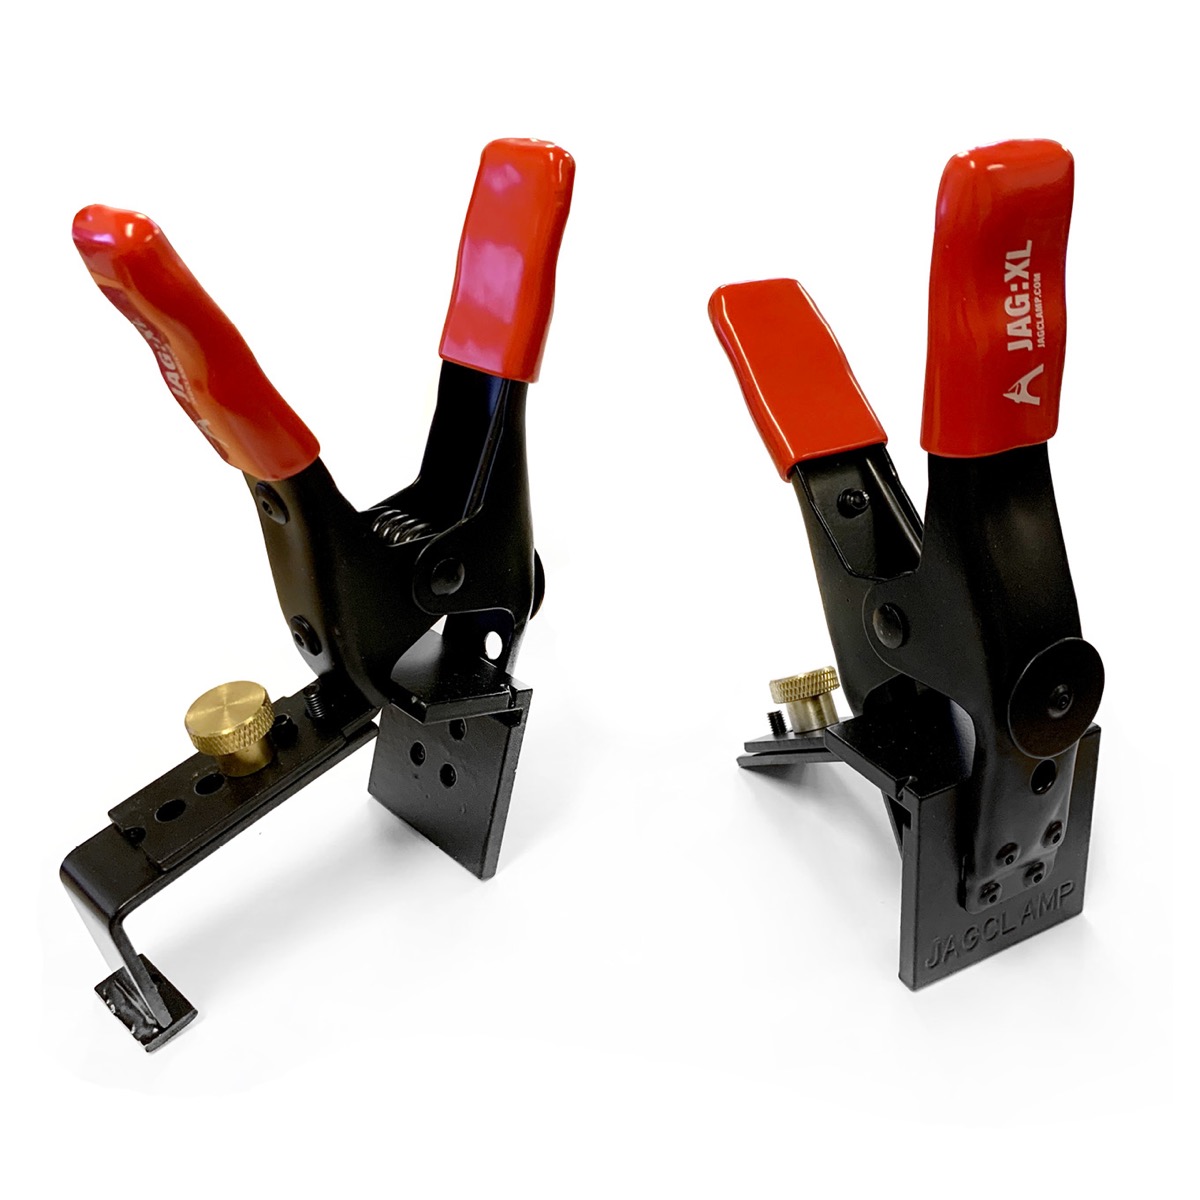 The JAGClamp XL is a multi-purpose line fixing adjustable clamp (sold as a pair) used by Bricklayers. The JAGClamp XL is the upgraded adjustable line stretcher clamp which can be adjusted allowing you the versatility to attach your guide line to brick, bl